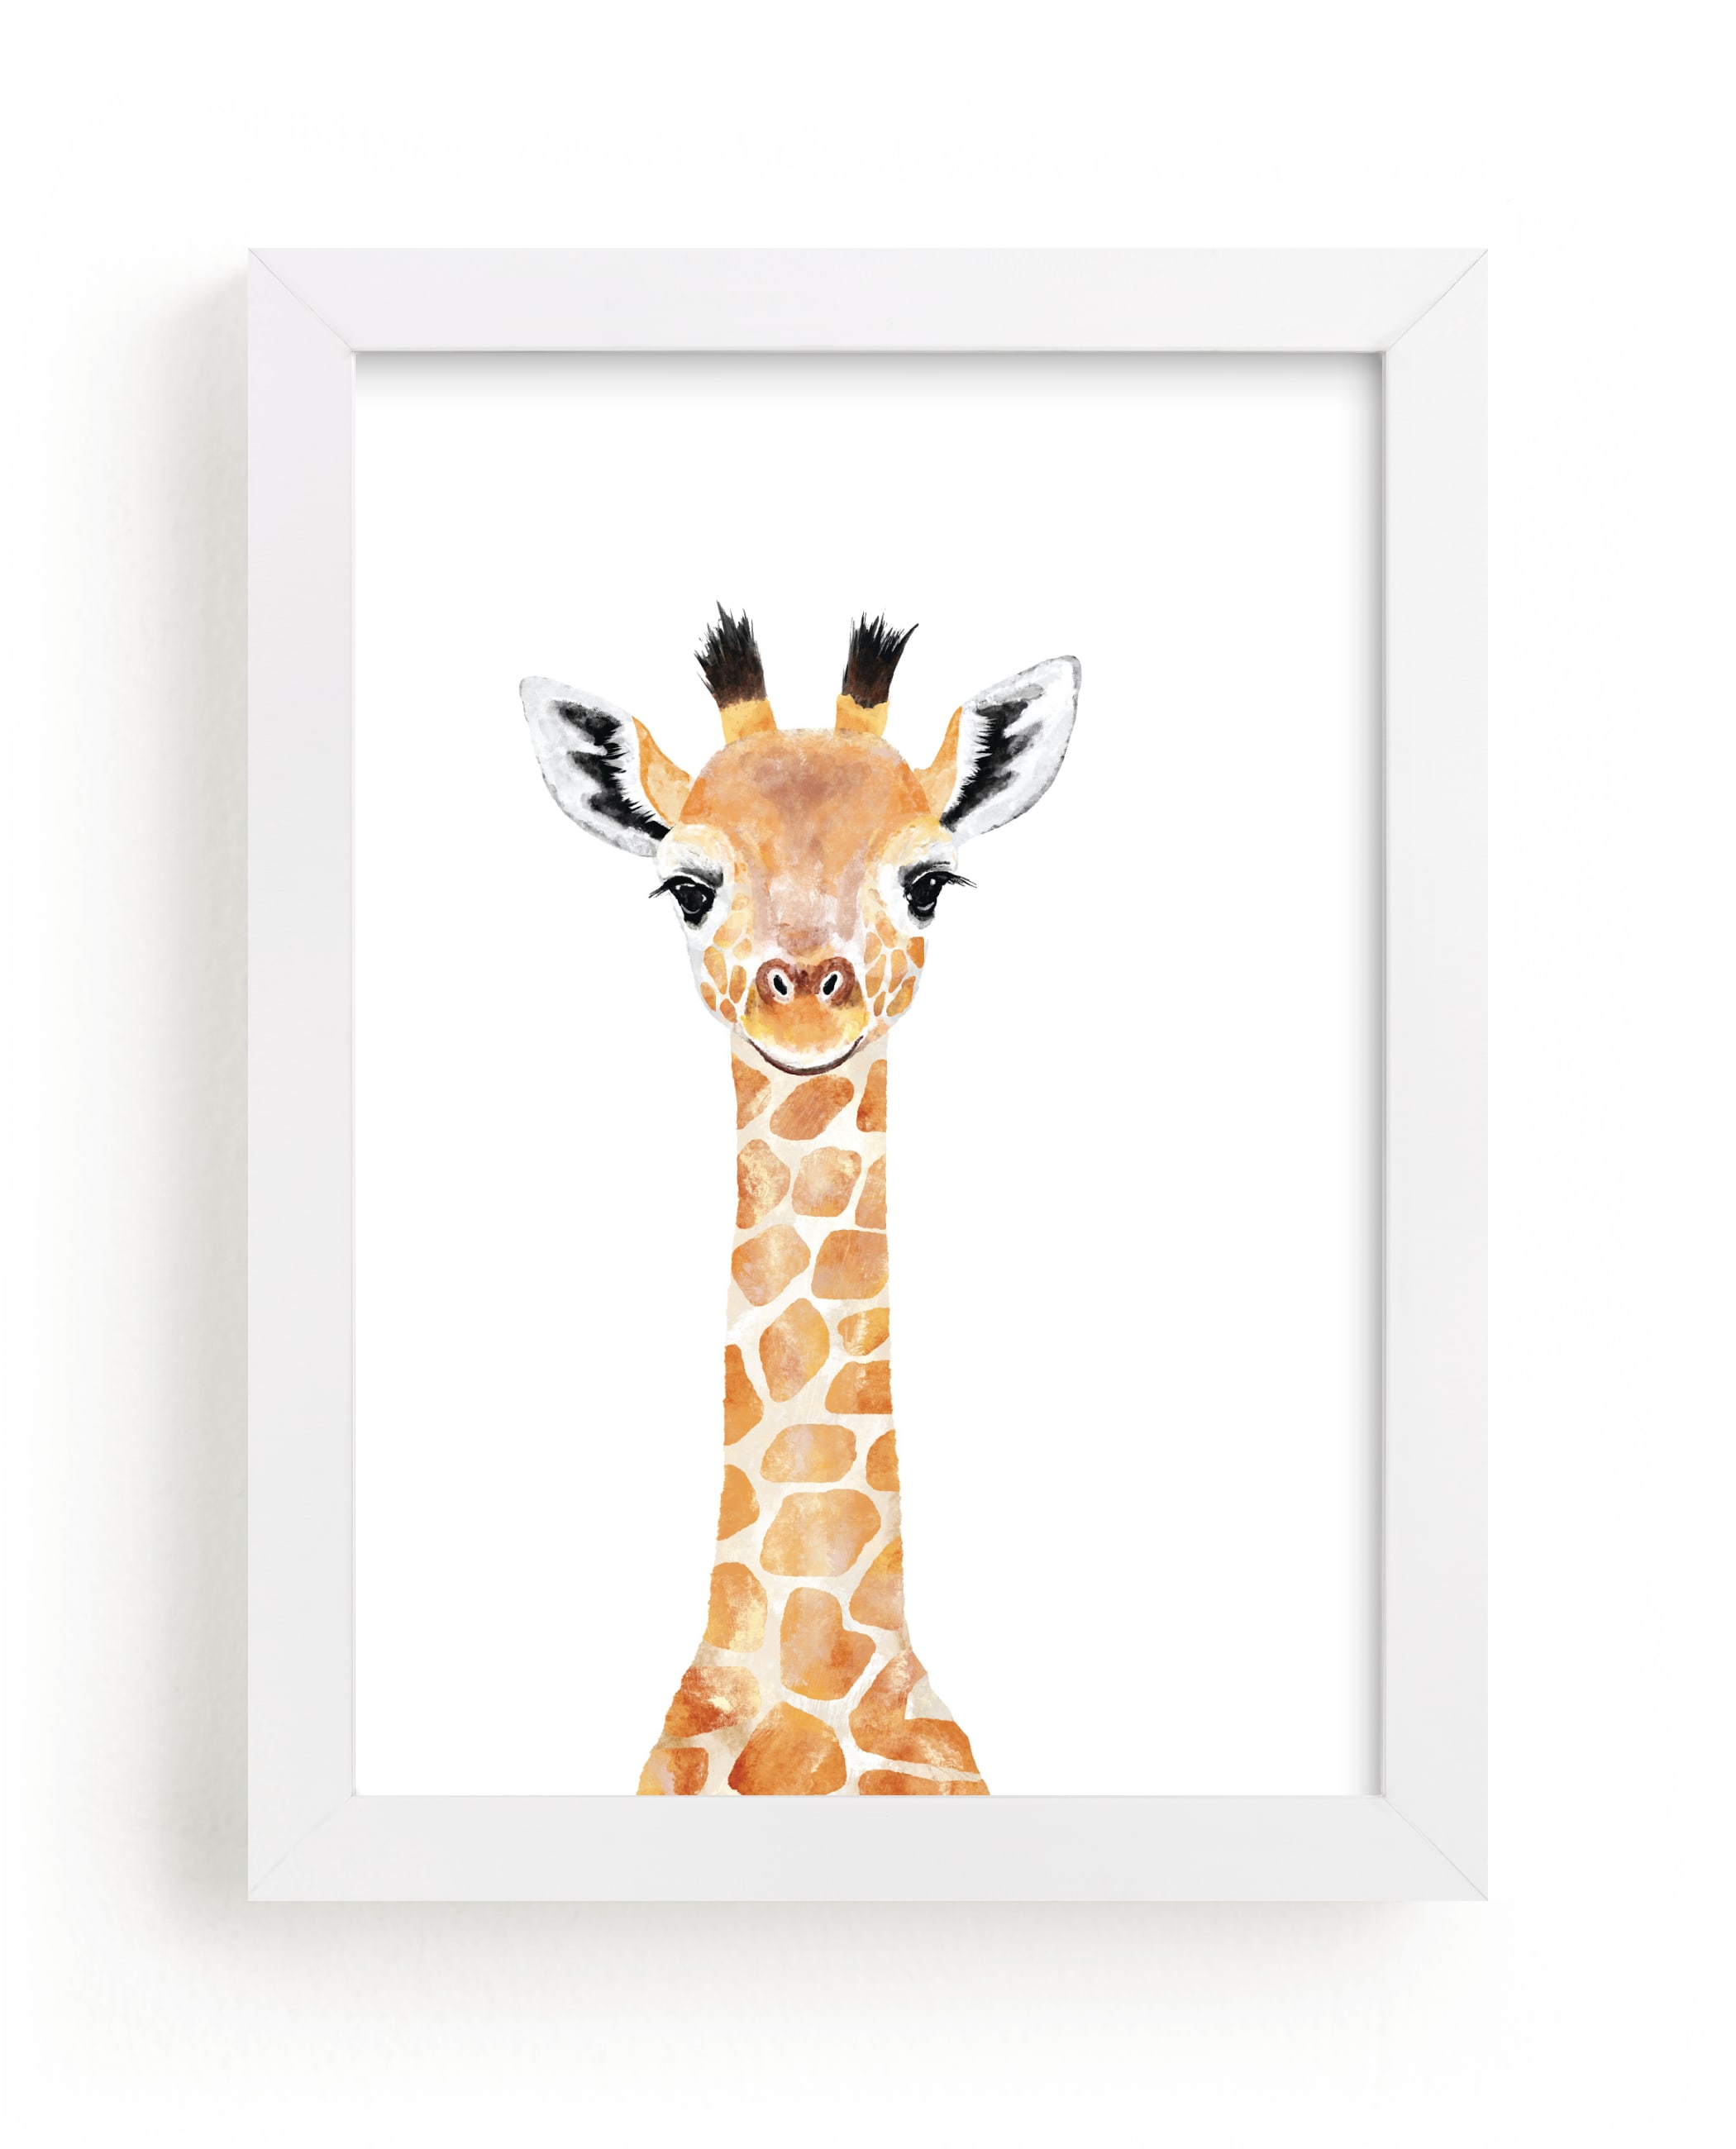 giraffe pictures for kids